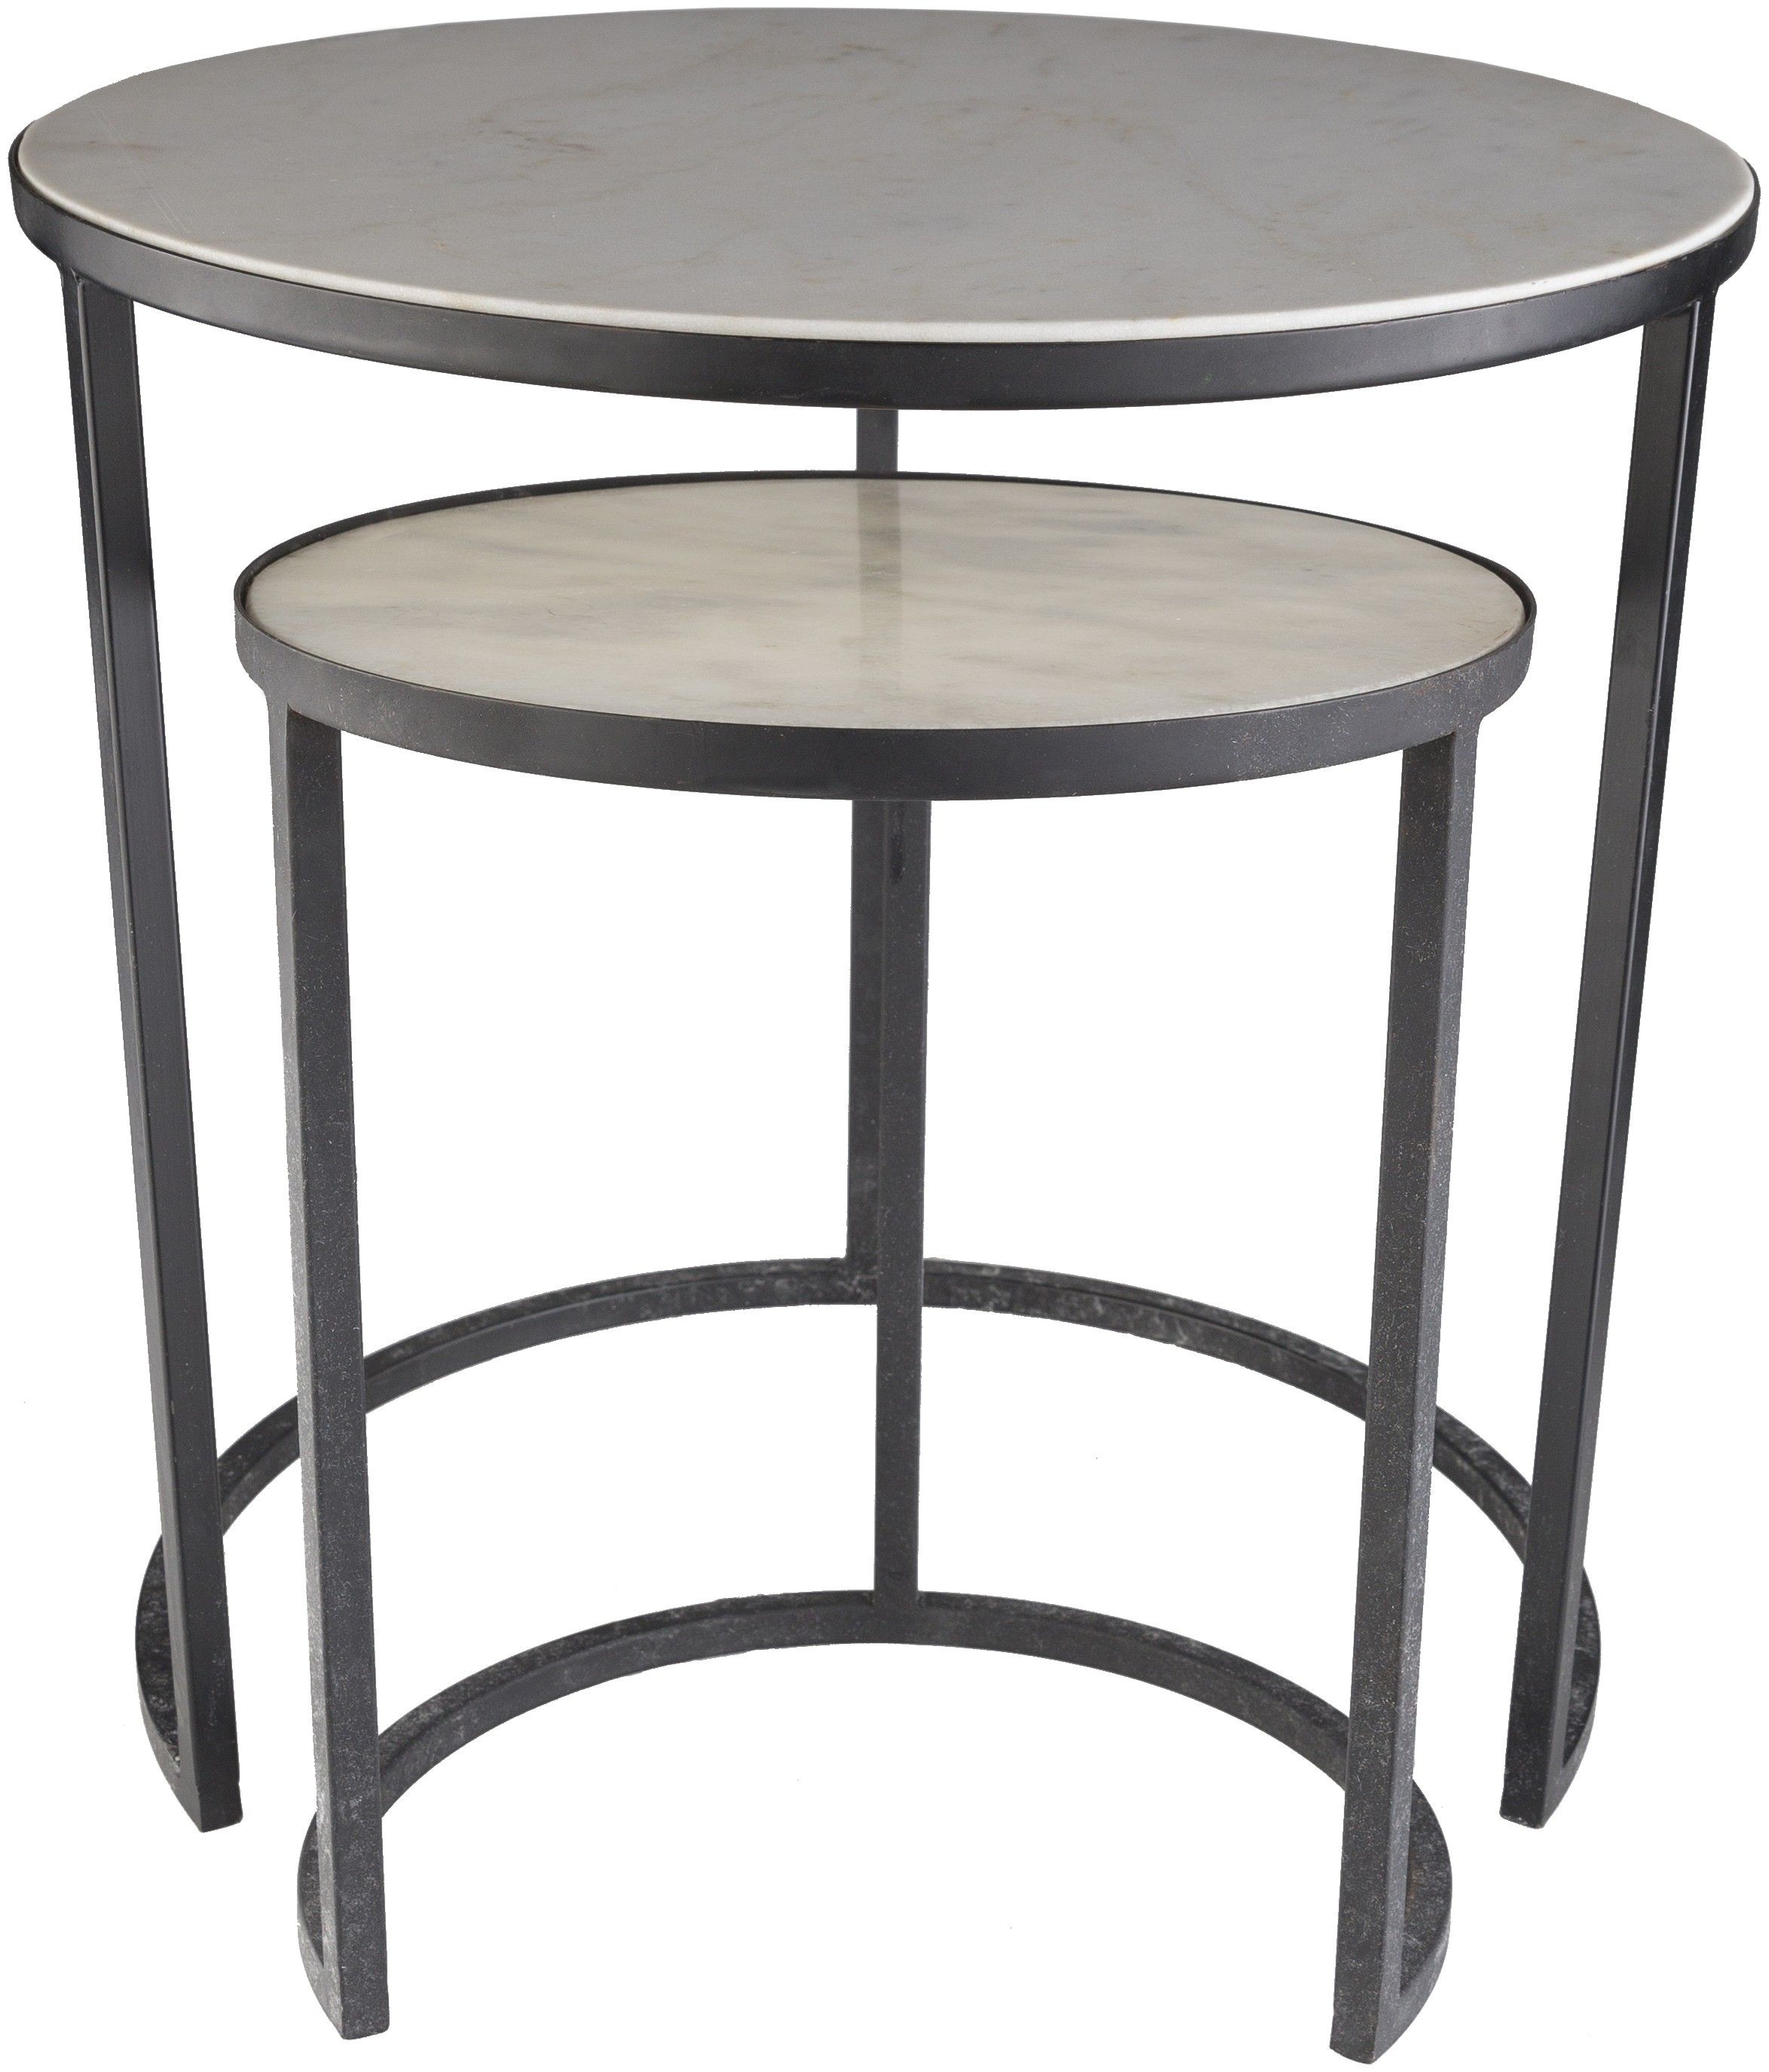 lulu clea nesting tables iron marbles and industrial knurl accent table set half circle coffee shades light mirrored side barn door dimensions clear plastic end fur blanket target